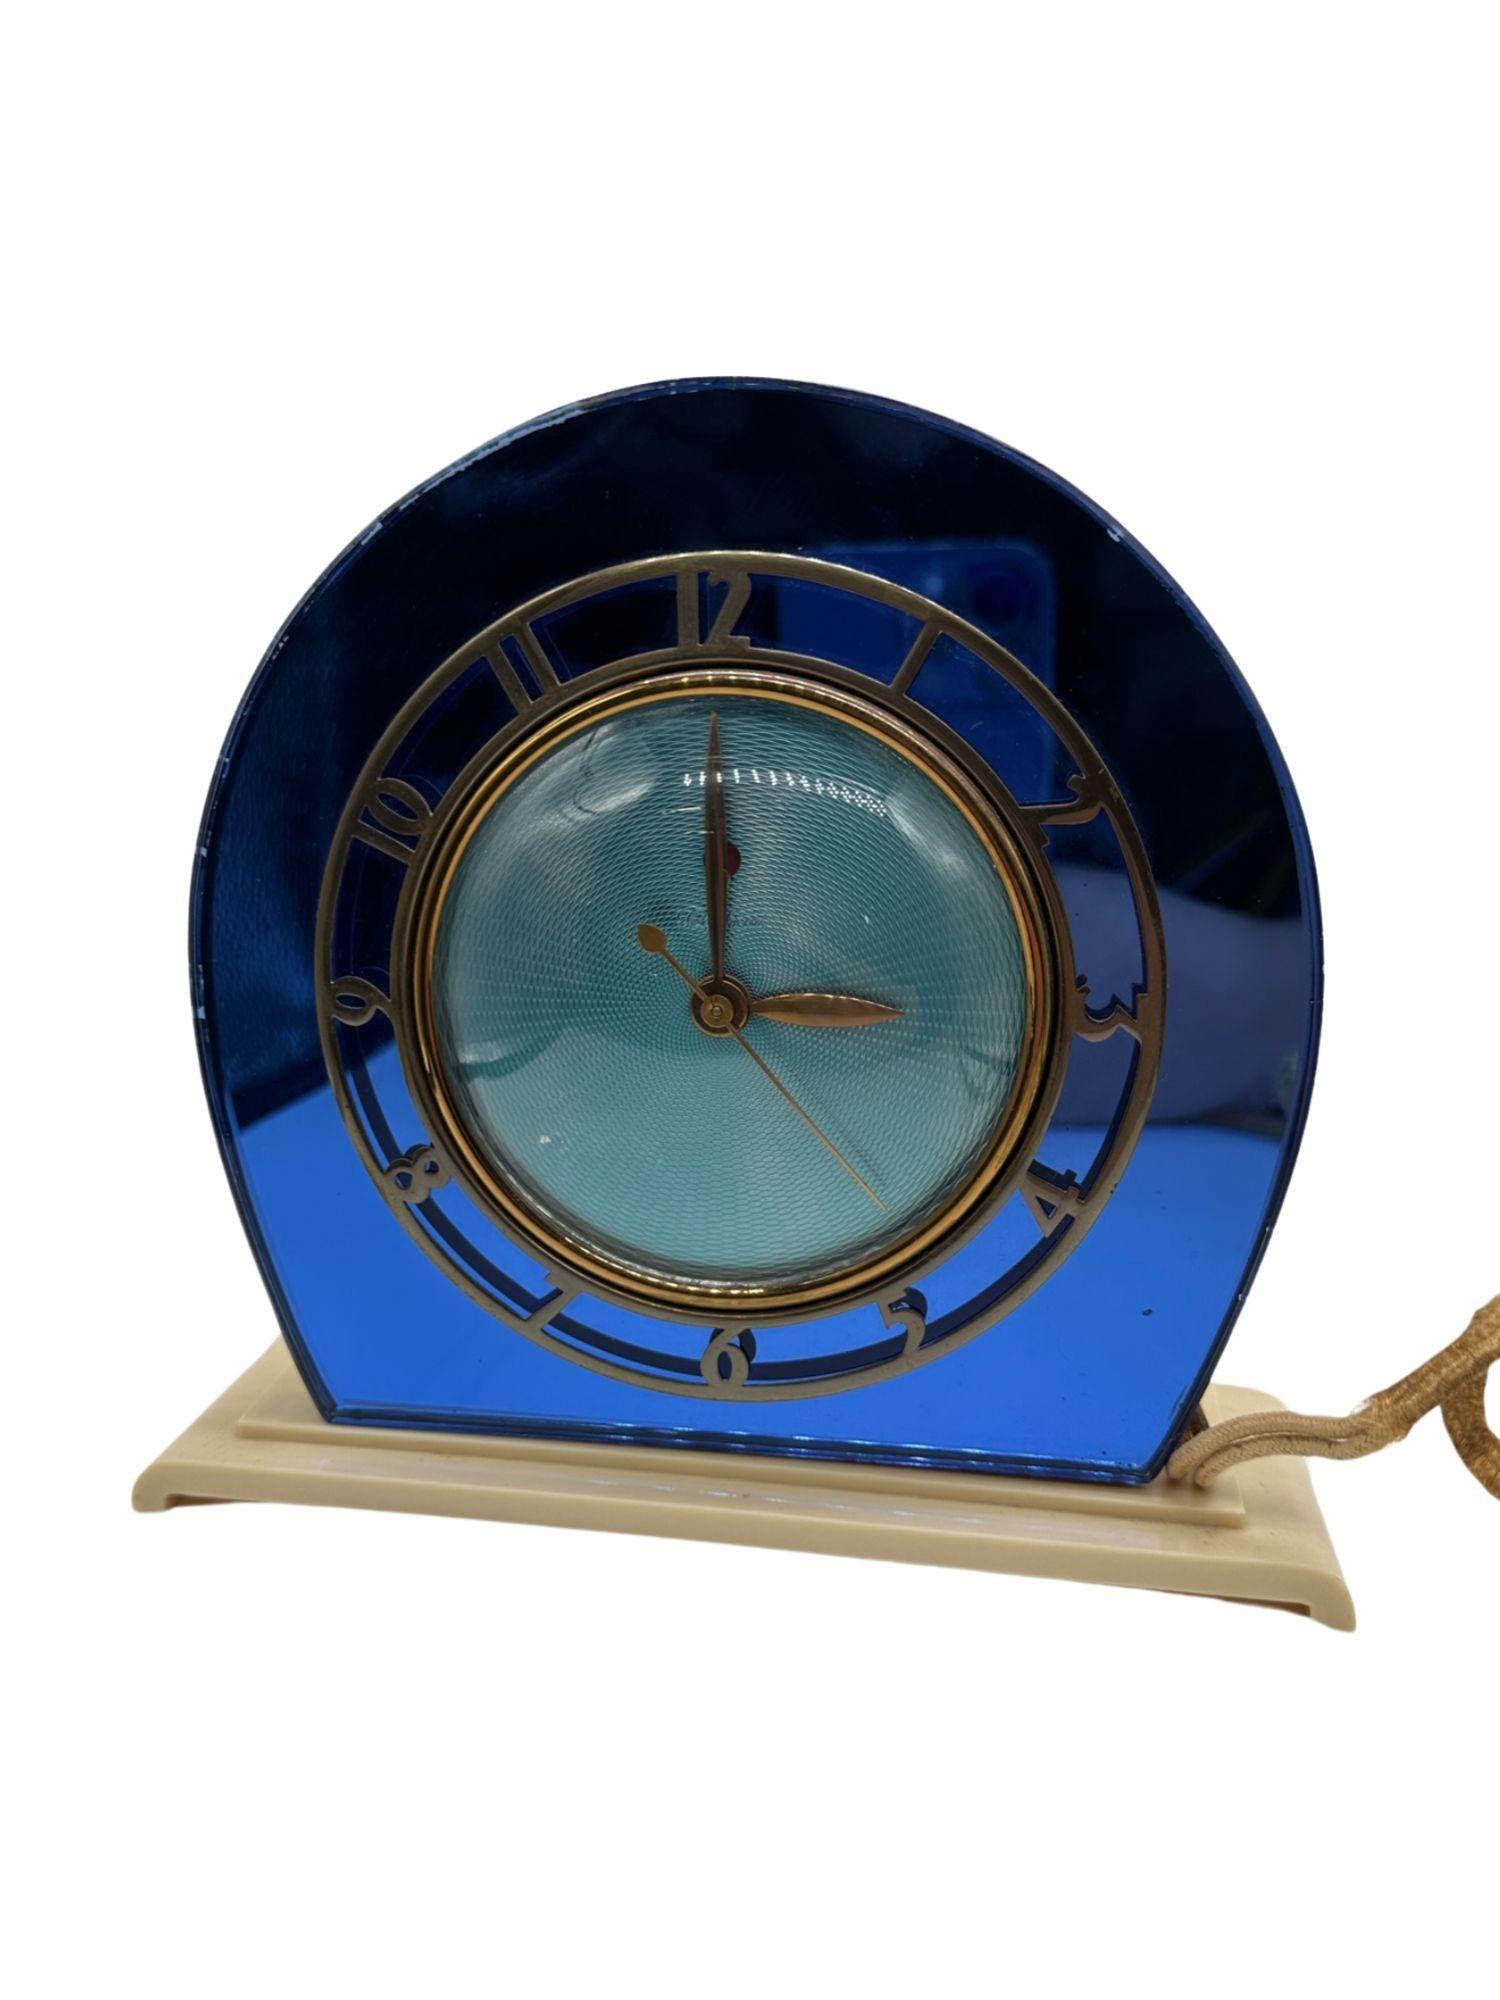 It features a stunning cobalt blue mirror, complemented by a polished white Plaskon base and hands. The dial boasts a textured blue surface, while the polished brass bezel is adorned with cut-out numerals. To adjust the time, simply pull out and